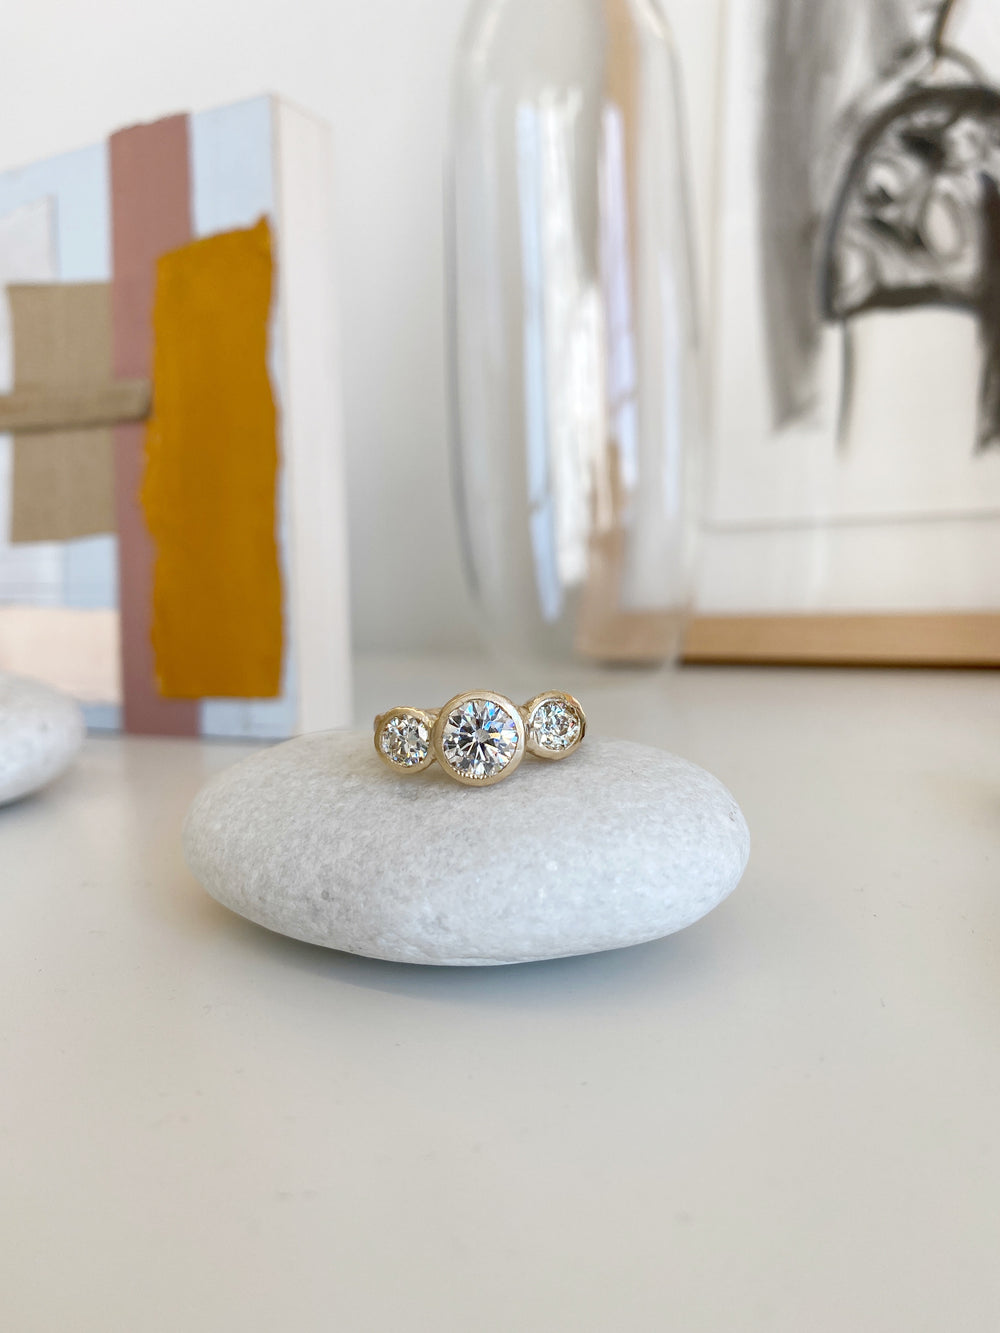 THE PERFECT FIT? – Jane Pope Jewelry